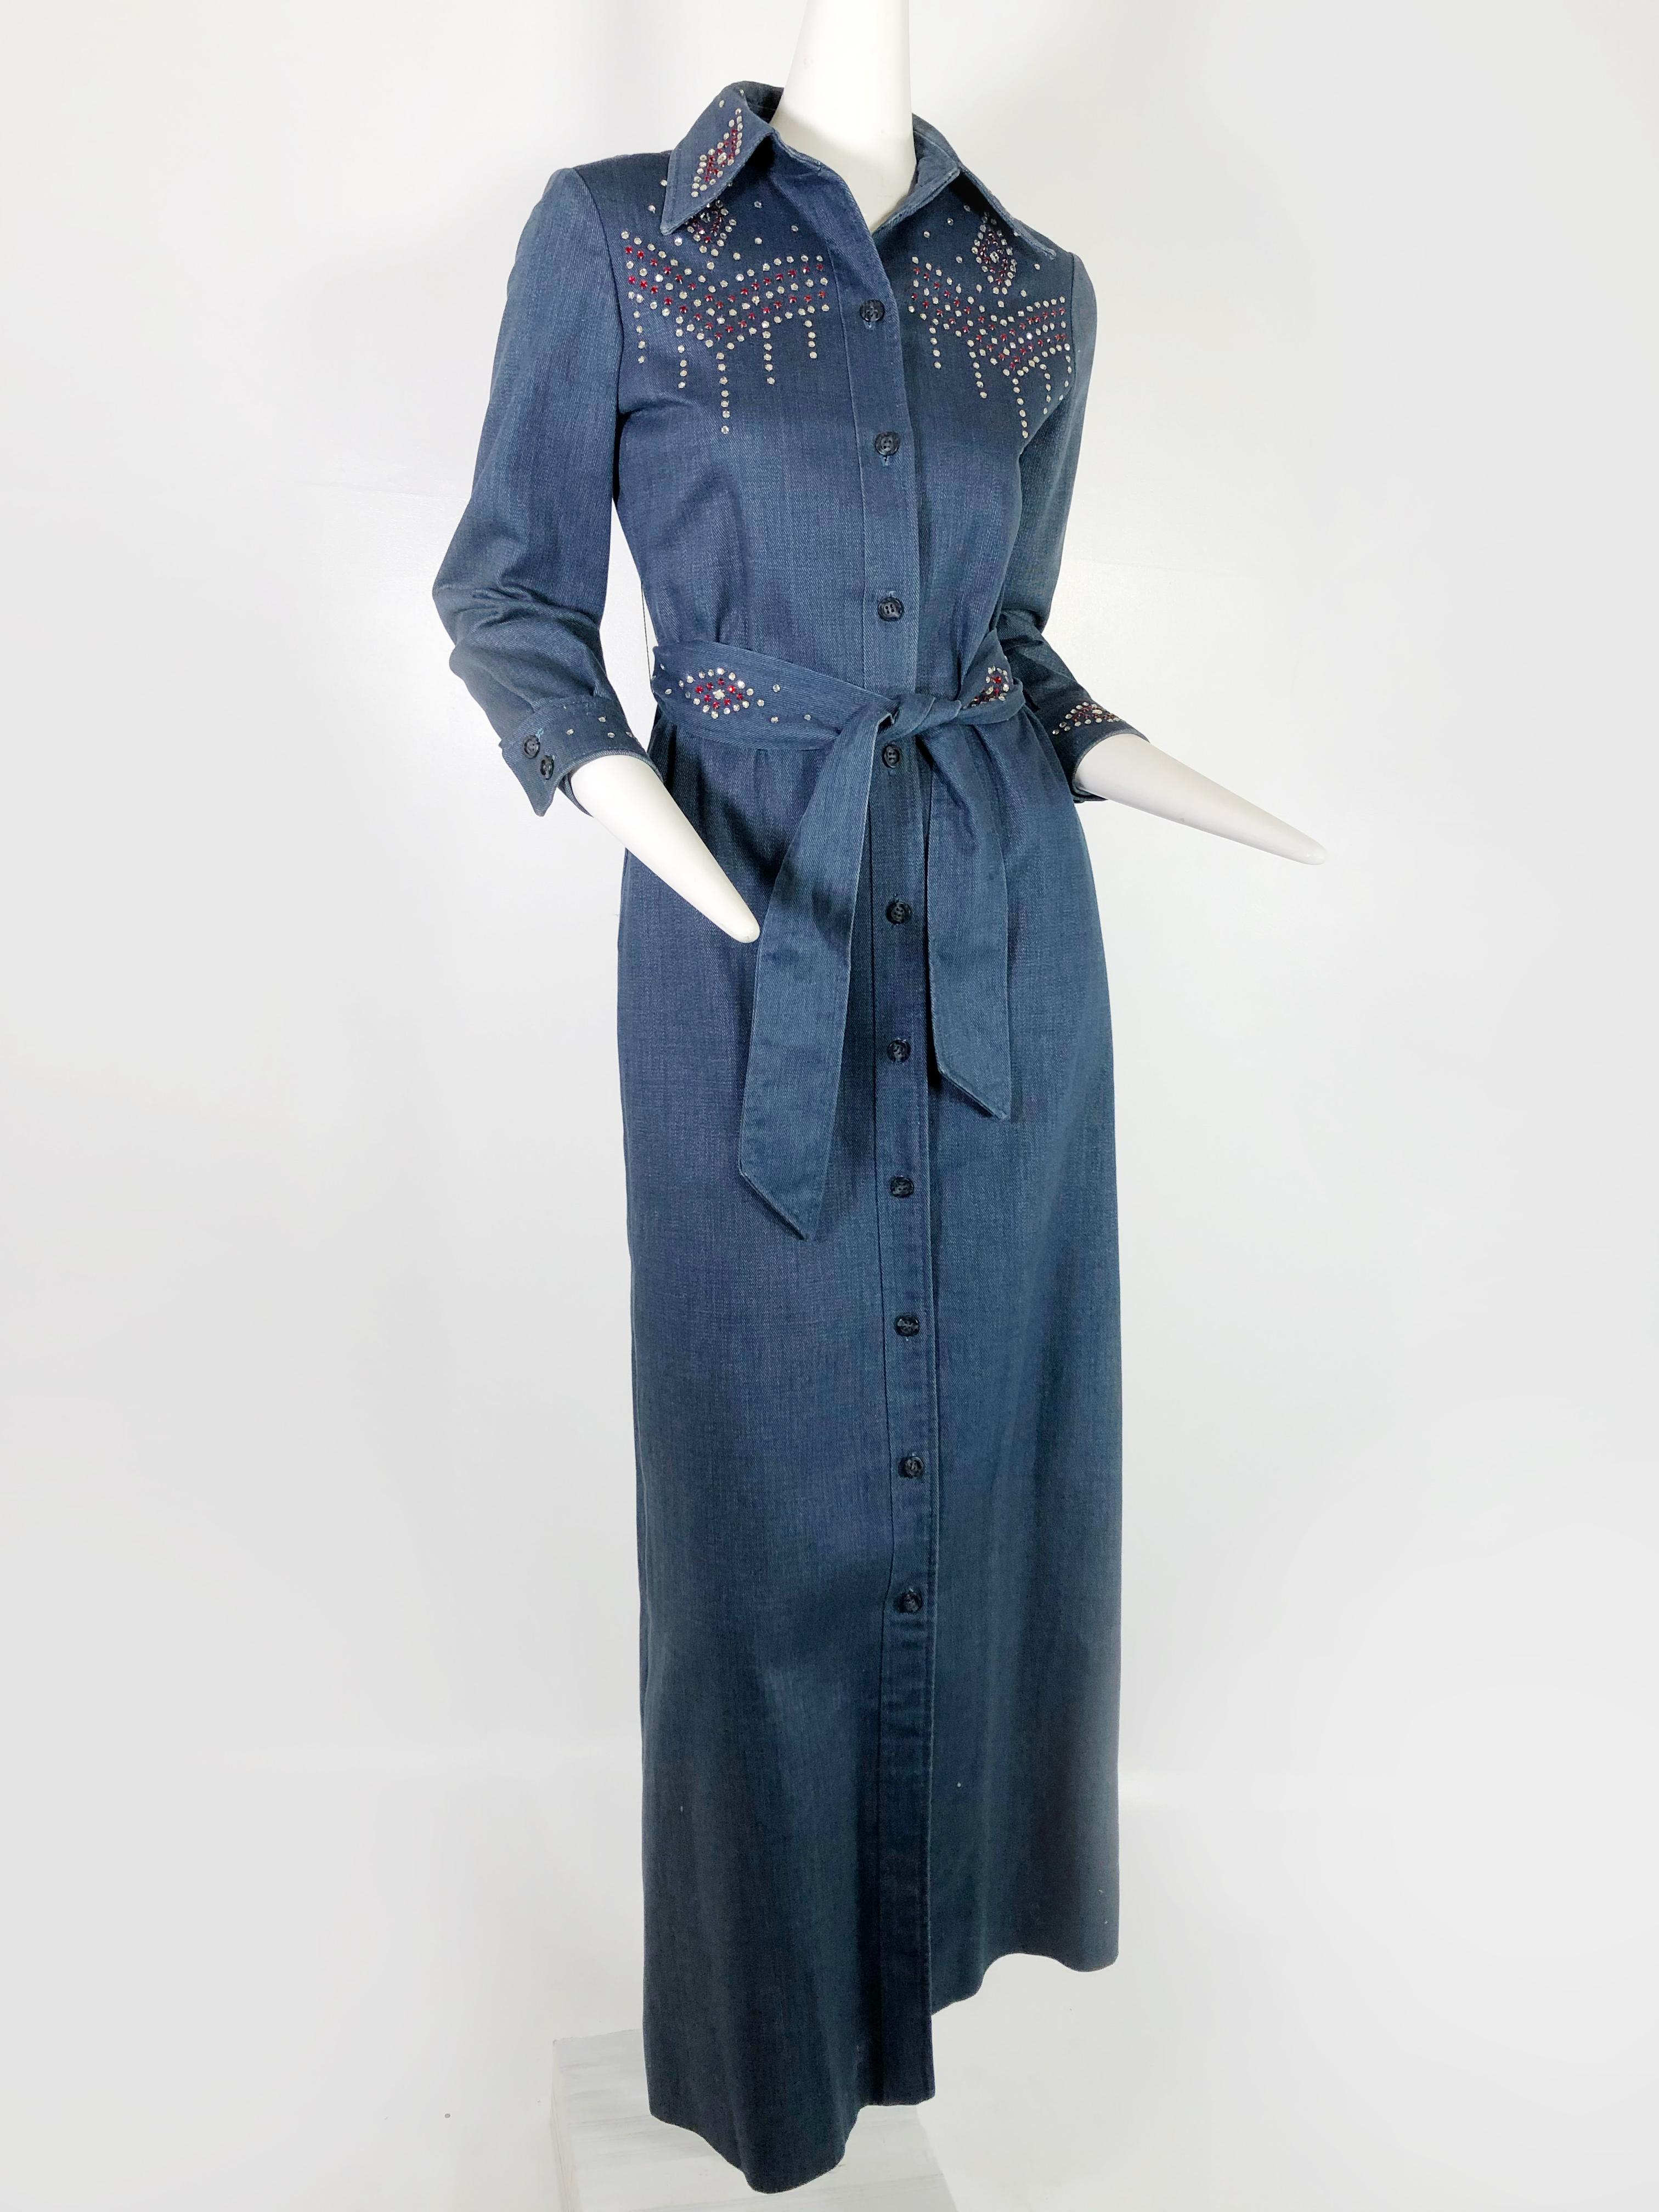 A fabulous Western rock star style denim maxi coat with red and white rhinestone studs. Studded at the neckline, bodice, back, belt and wristbands with classic Western wear patterns. Unlined, with side slit pockets. This is a true vintage